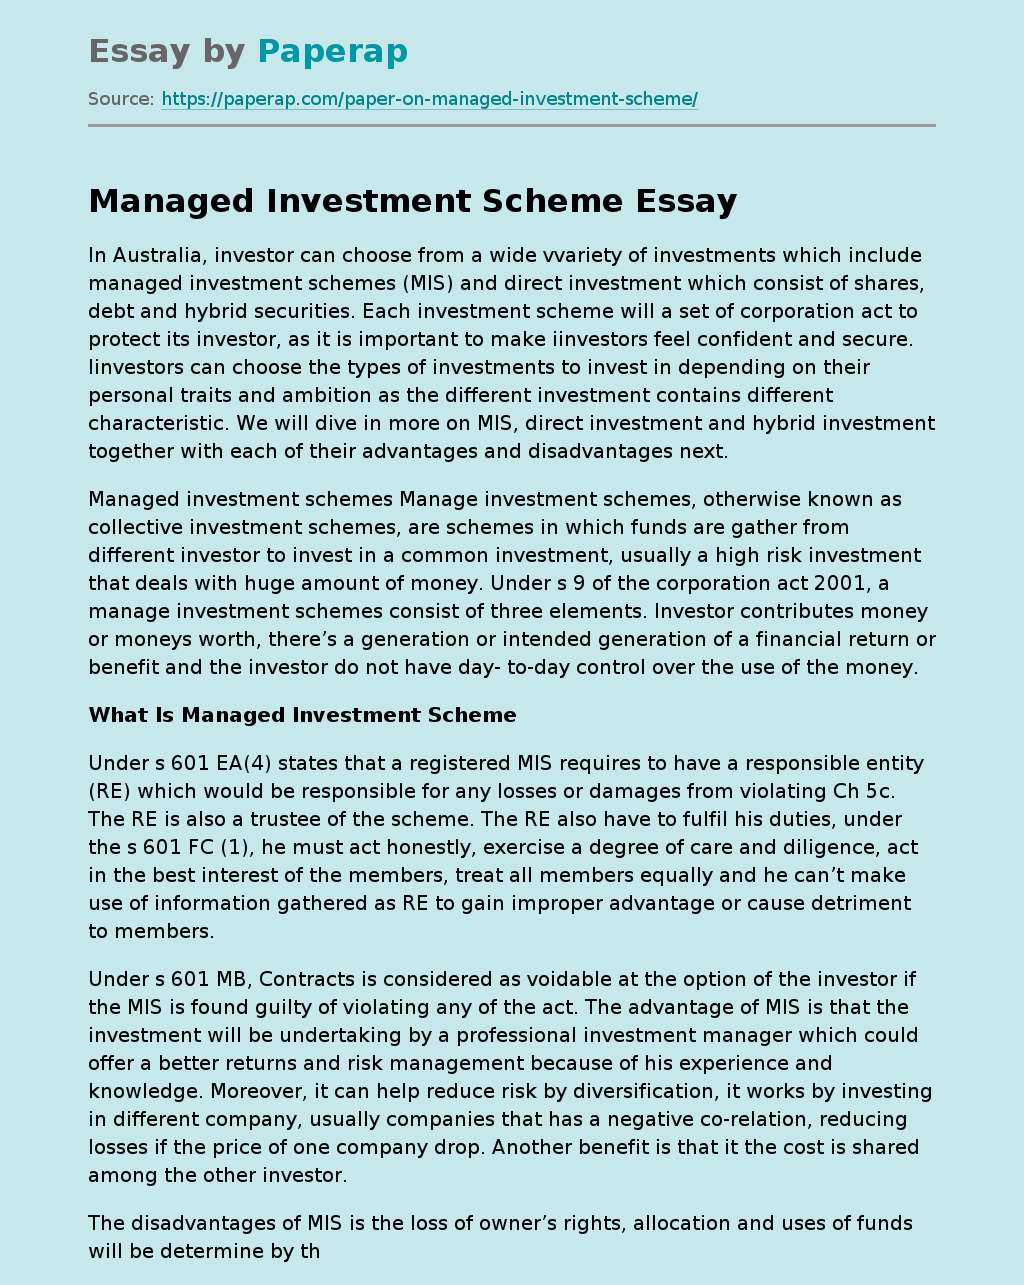 What Is Managed Investment Scheme